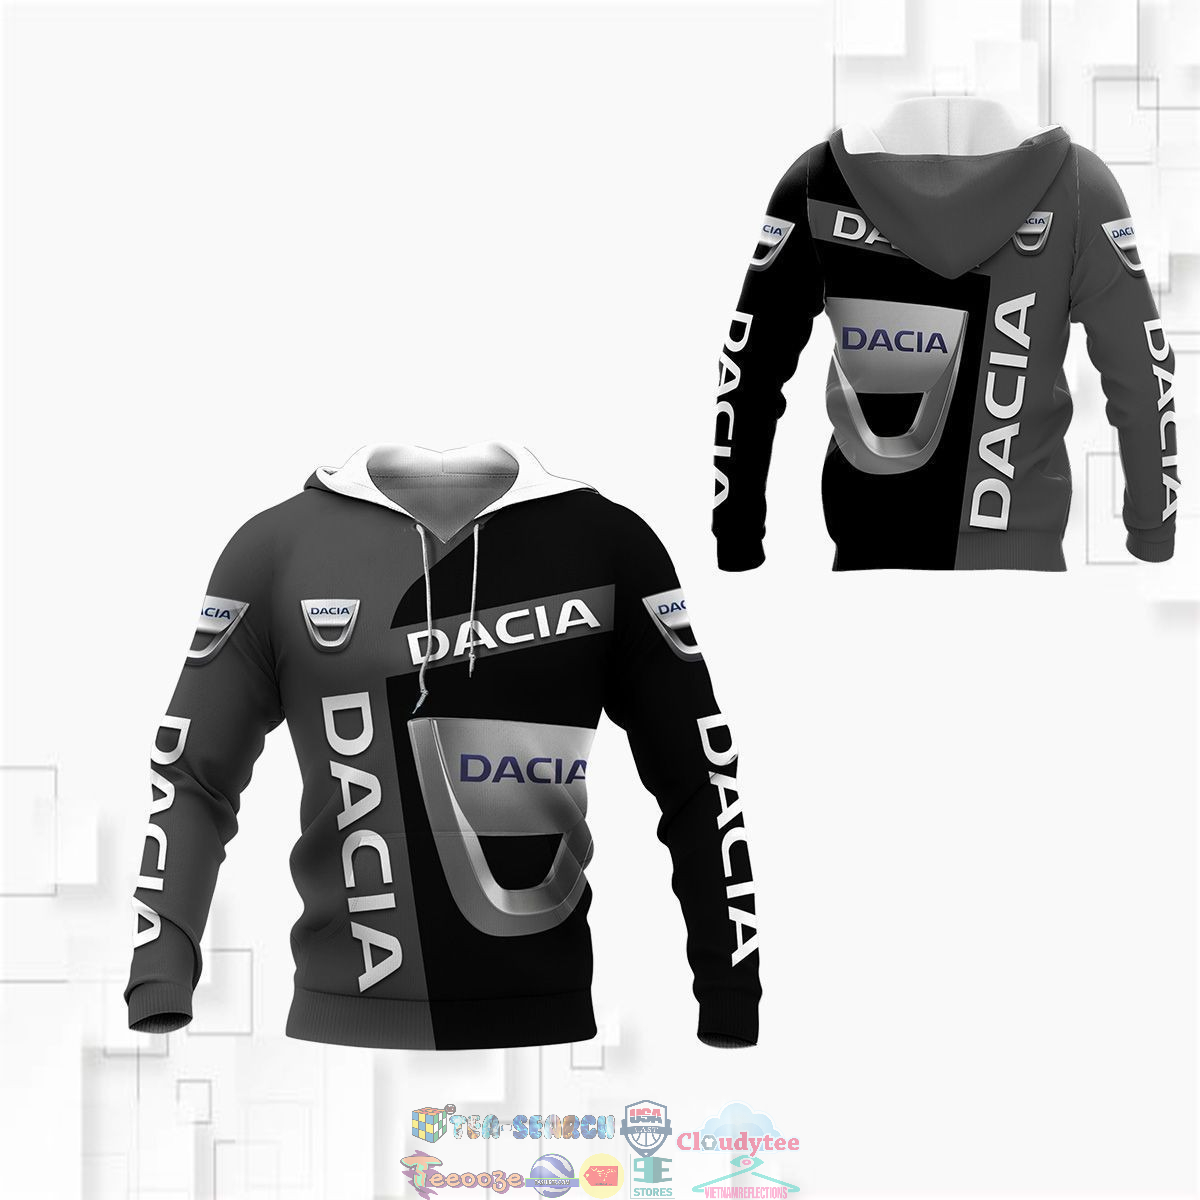 Automobile Dacia ver 2 3D hoodie and t-shirt